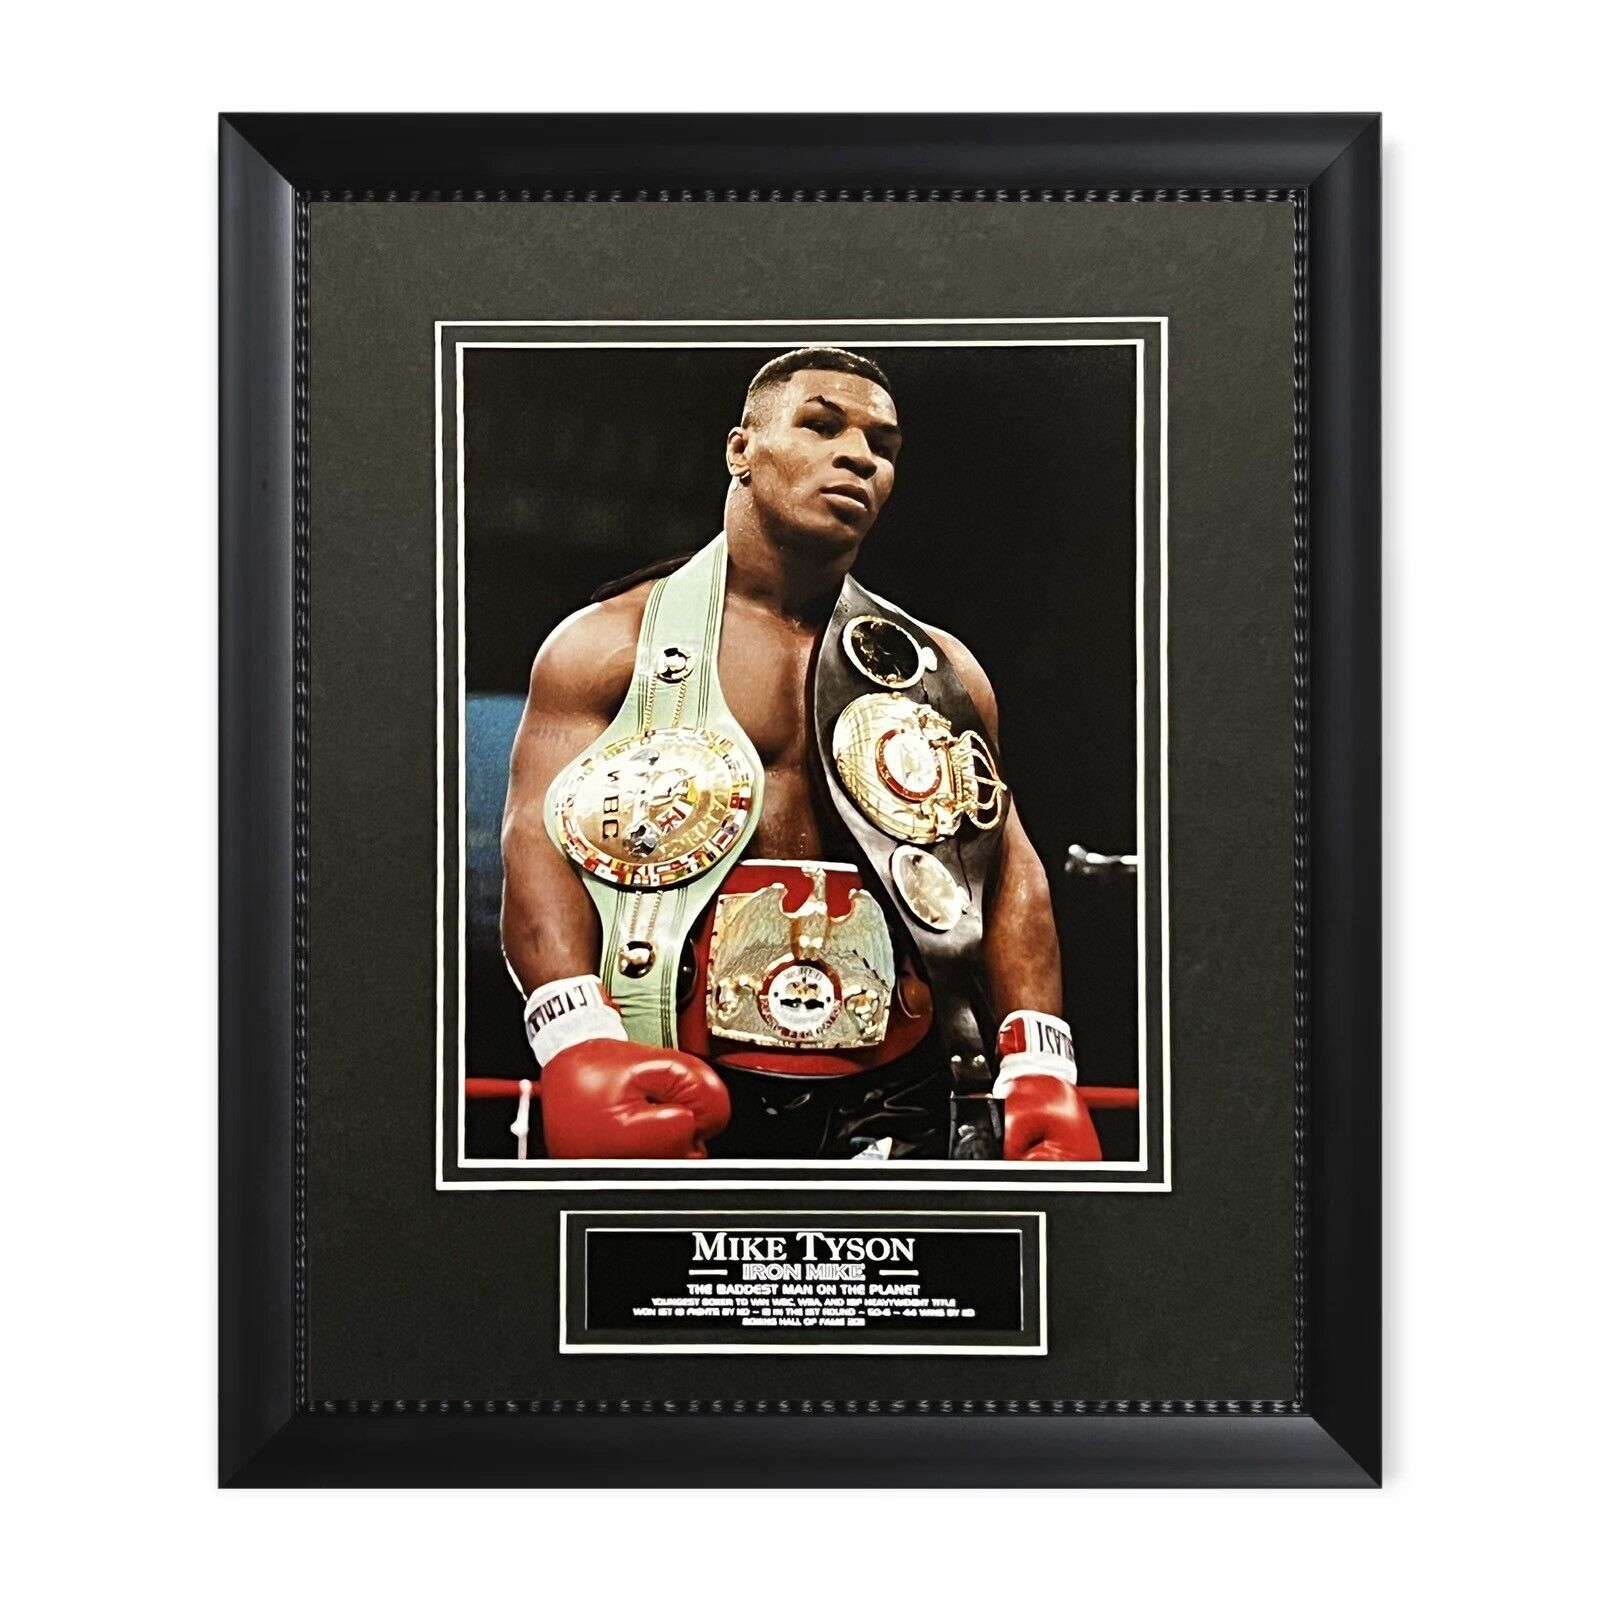 Mike Tyson Unsigned Photograph Framed to 11x14